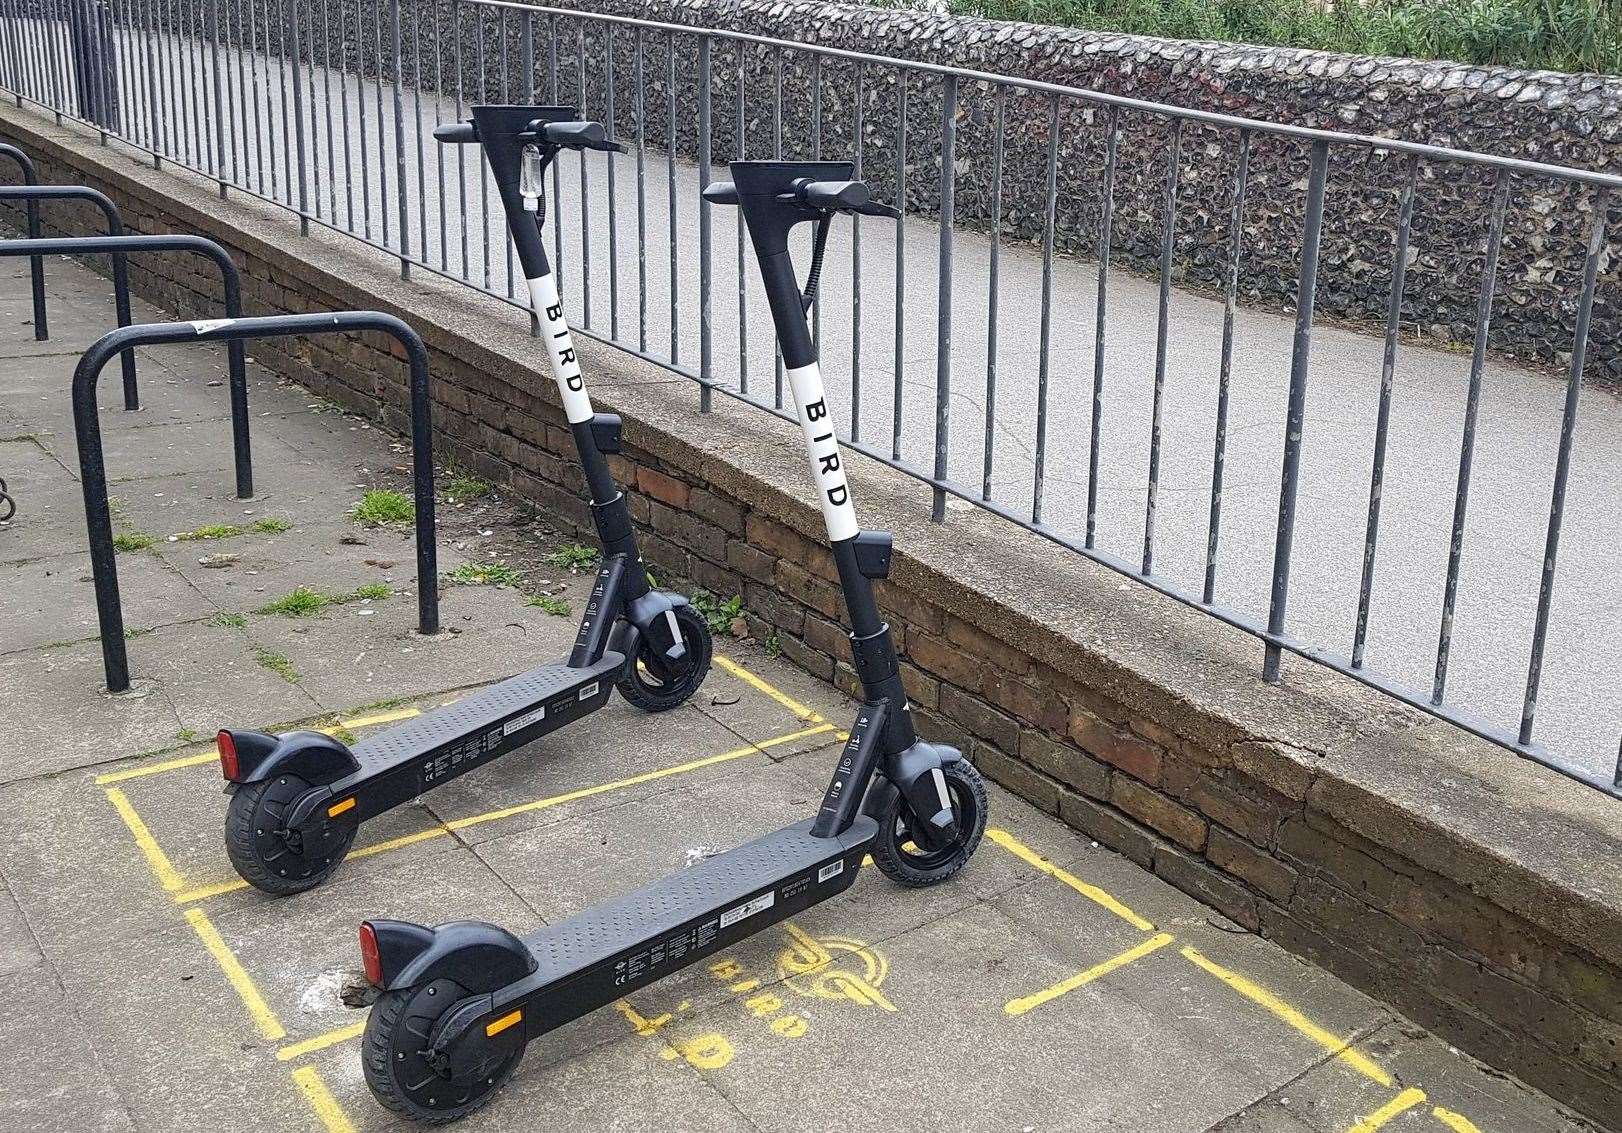 E scooters are available to rent across Canterbury as part of a trial scheme